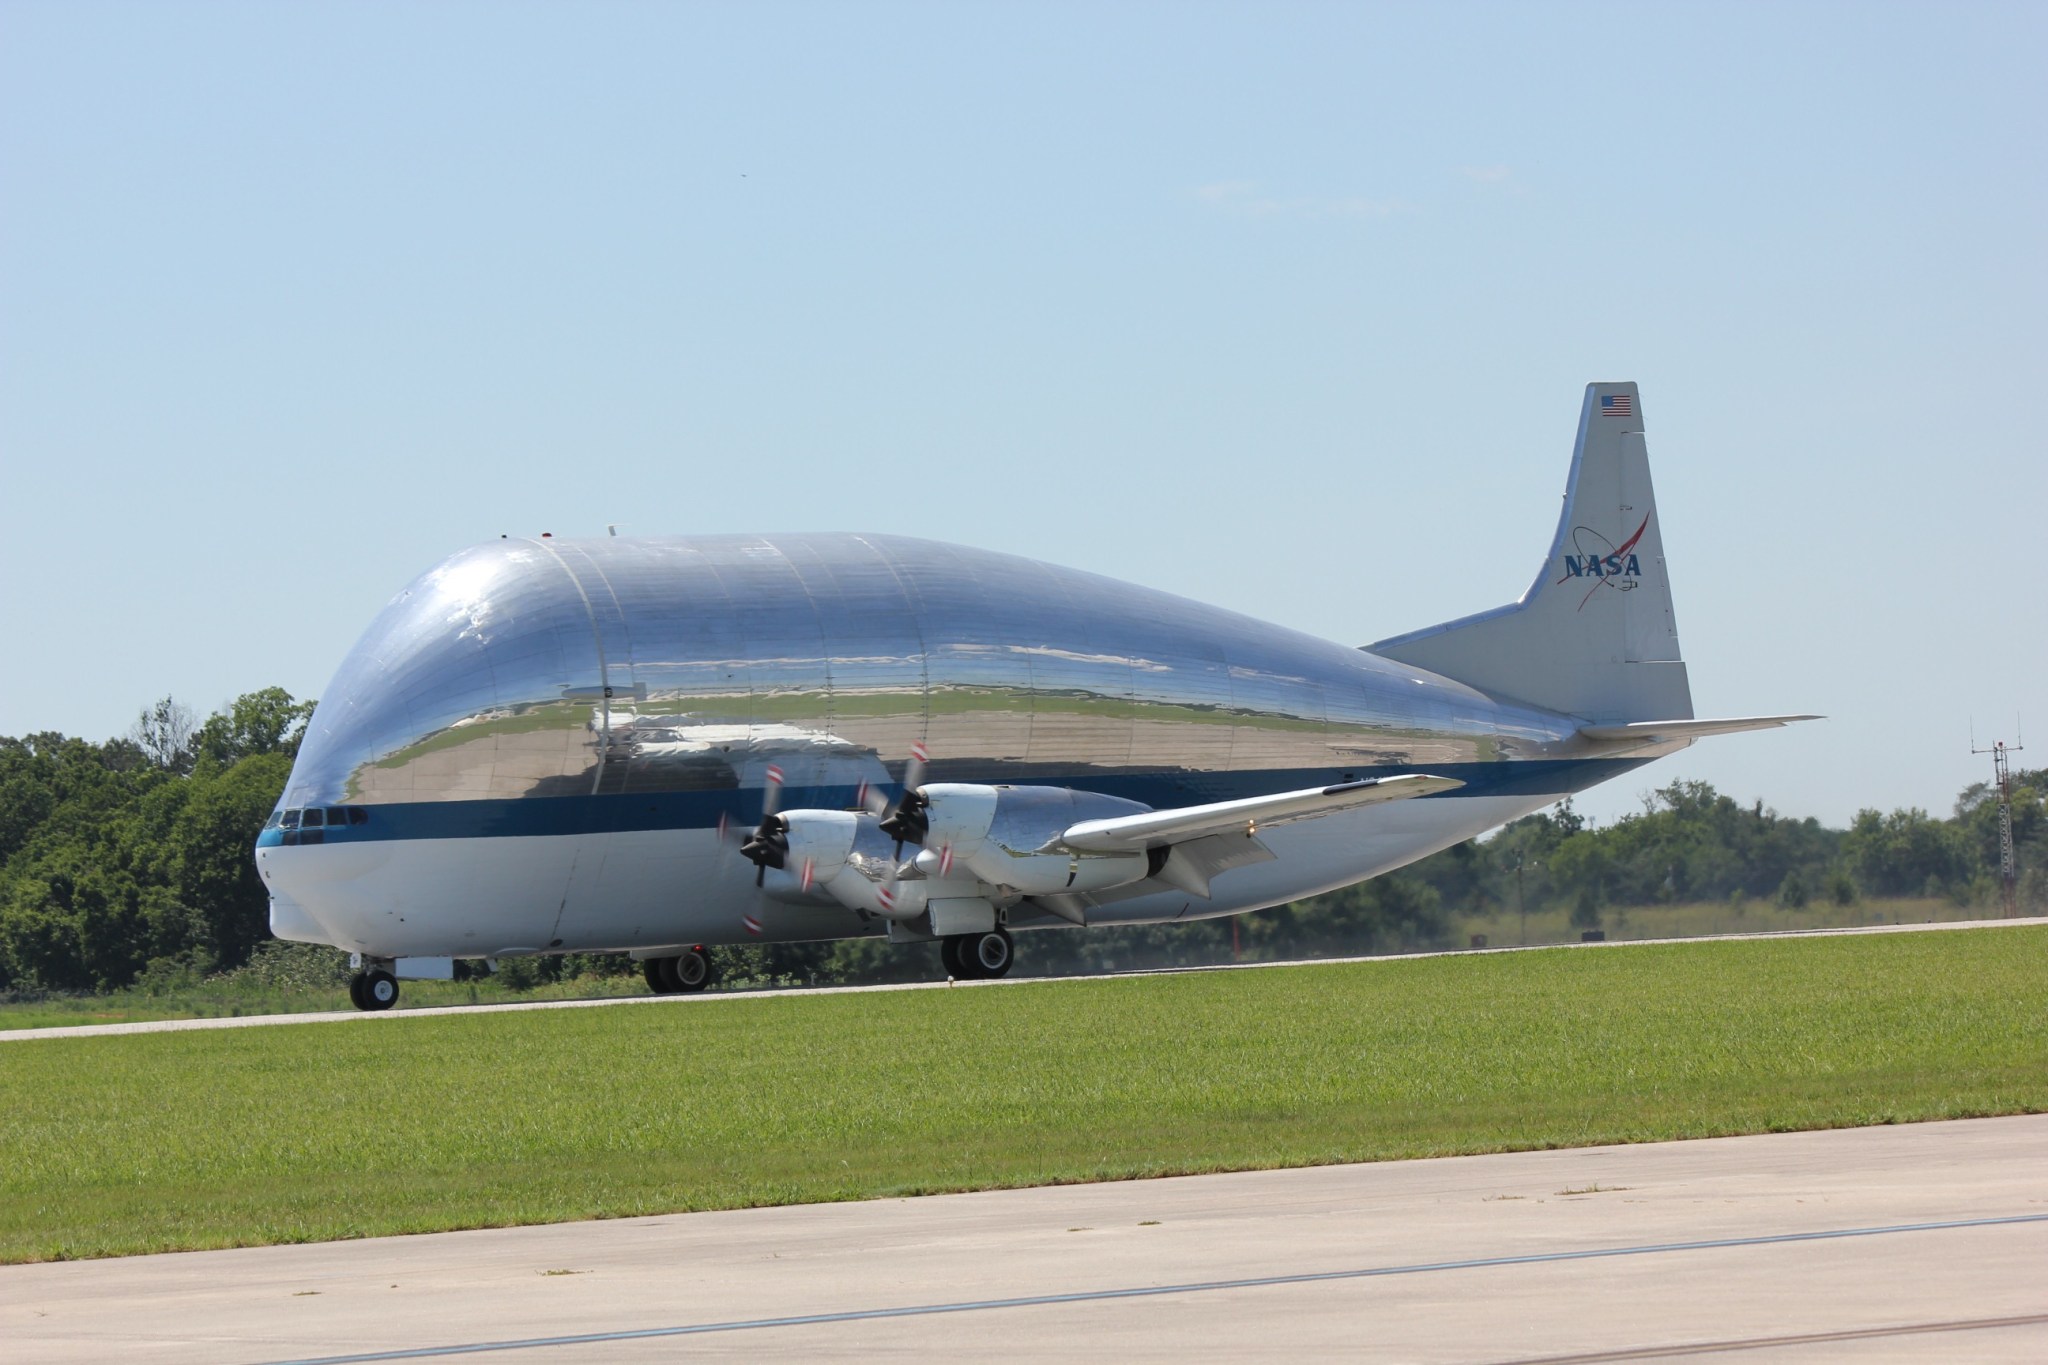 NASA’s Super Guppy aircraft stationed at NASA’s Marshall Space Flight Center in Huntsville, Ala. in 2018.  The aircraft has a unique shape that allows it to carry bulky or heavy hardware that could not otherwise fit on a traditional aircraft. 